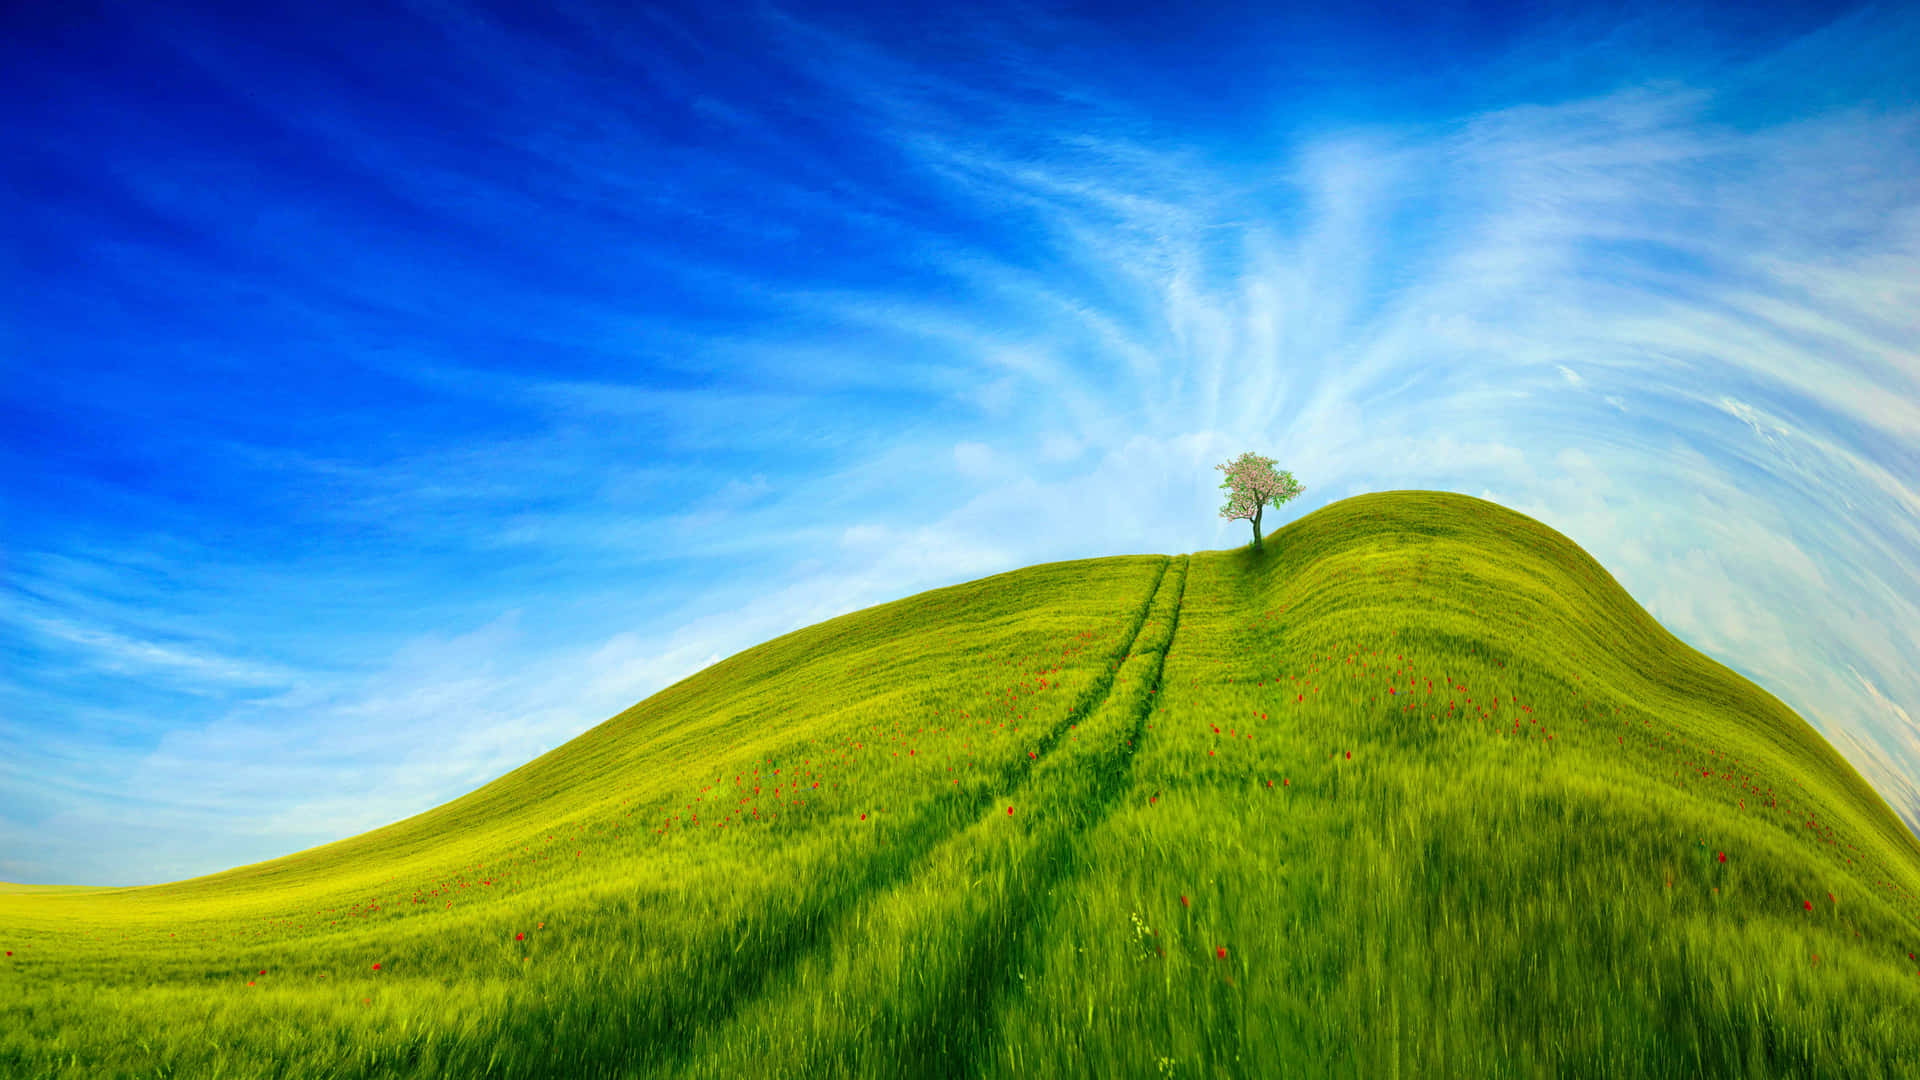 Enjoy green nature and its beauty with this calming background